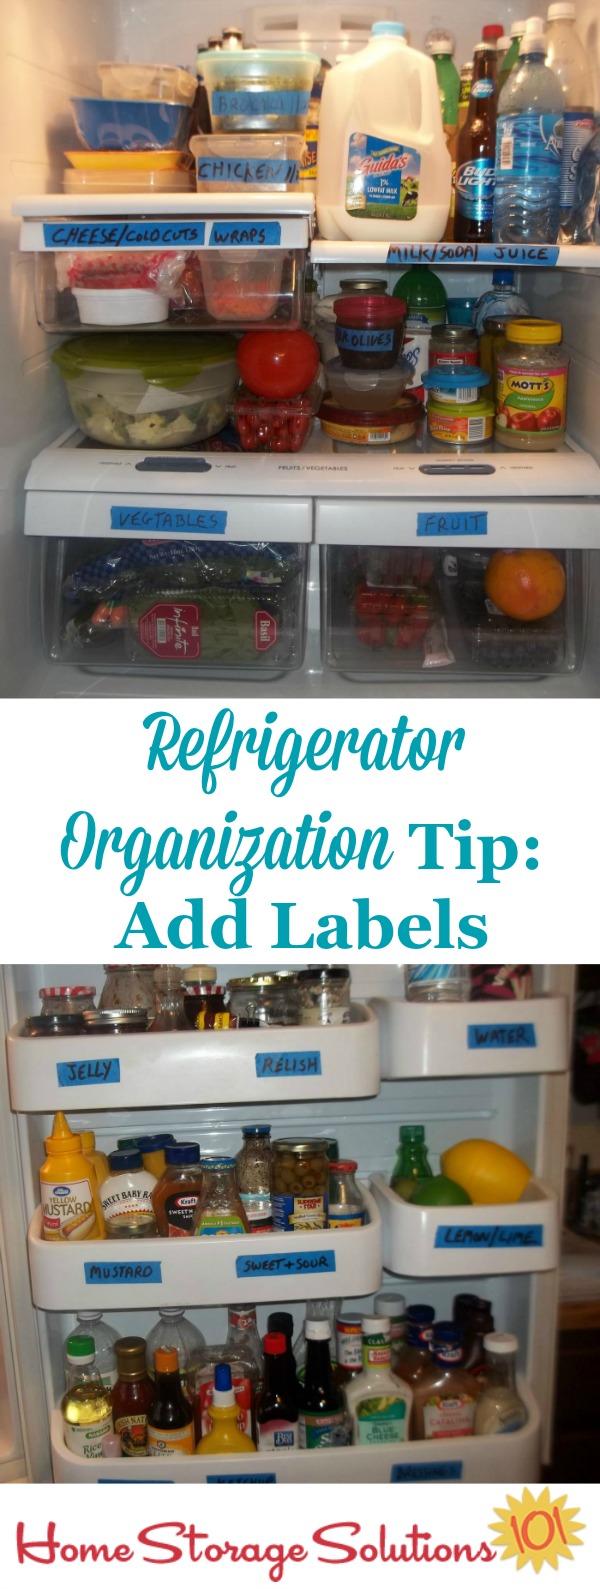 Add labels to your refrigerator shelves and door to help everyone know where to place items within your fridge to keep up the organizational method you've chosen {featured on Home Storage Solutions 101}